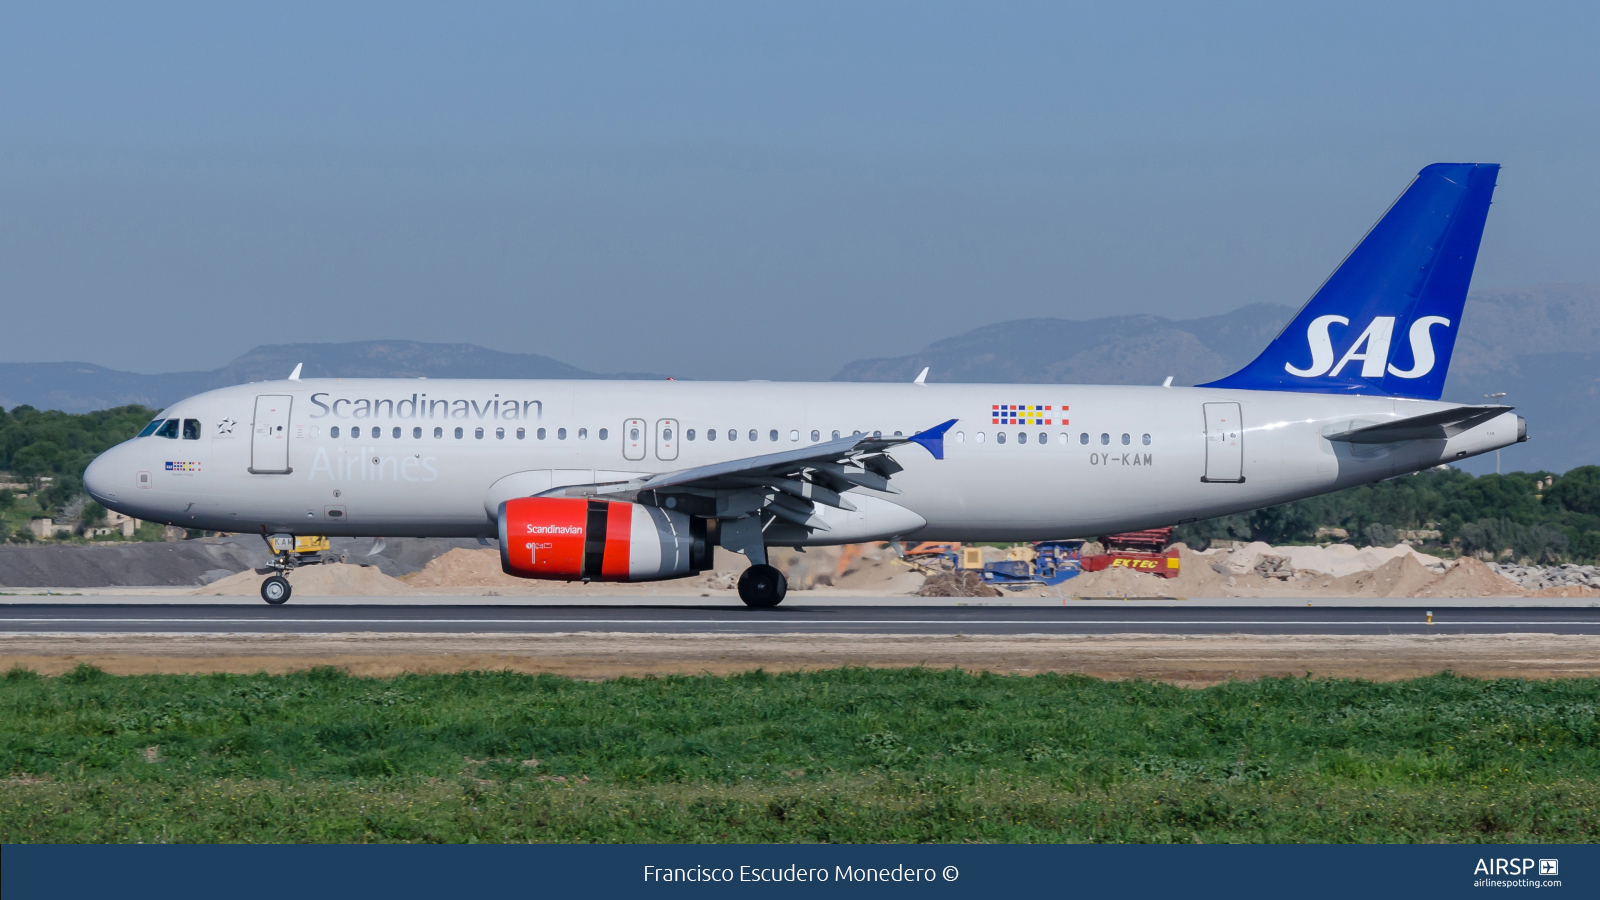 SAS Scandinavian Airlines  Airbus A320  OY-KAM